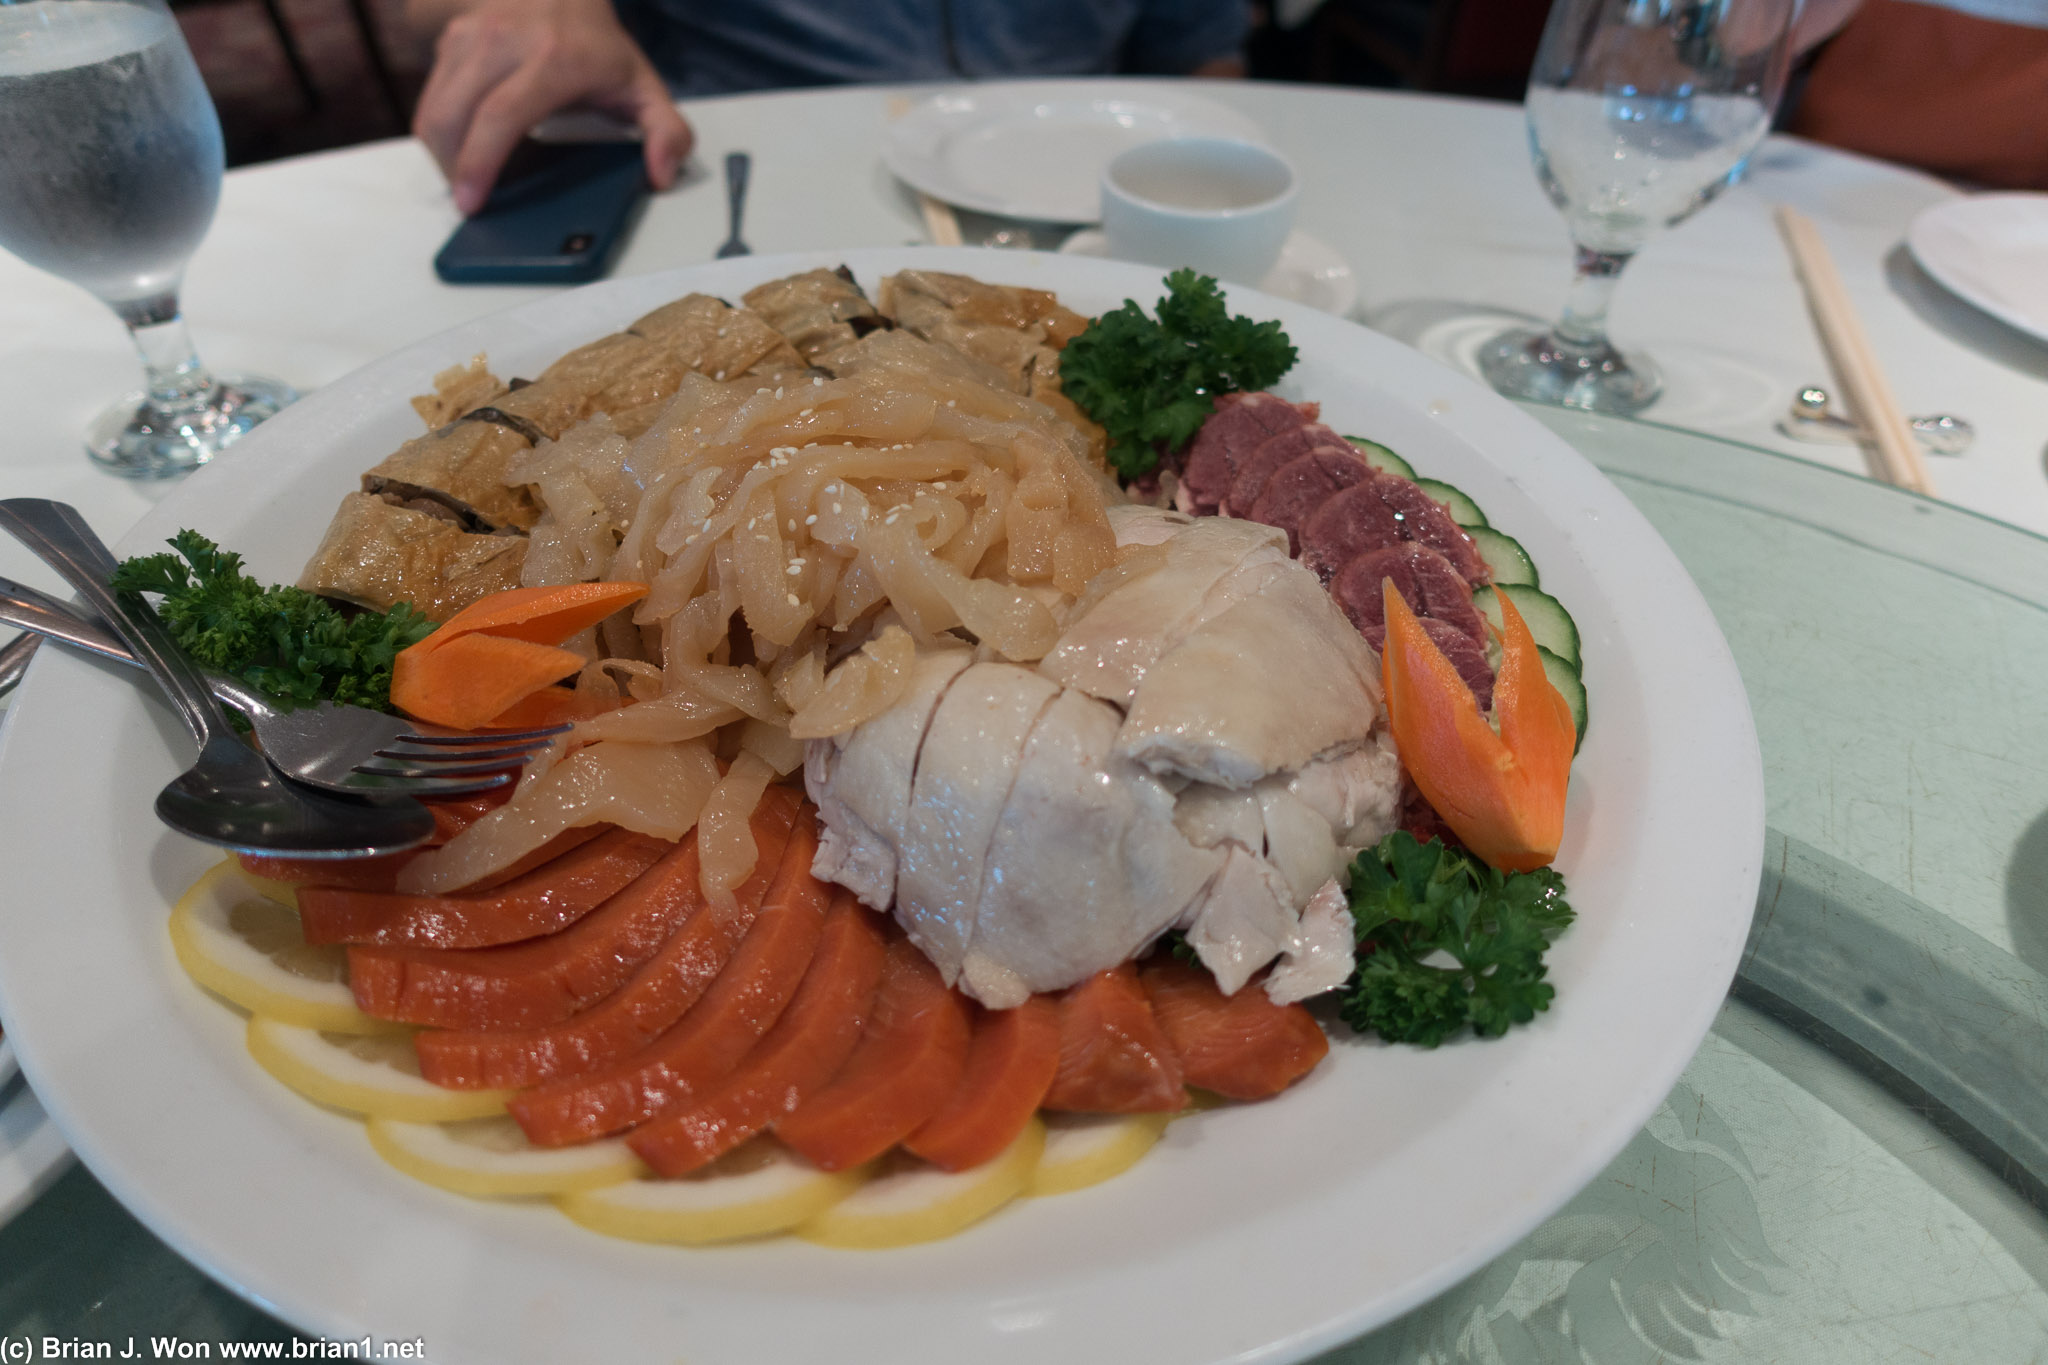 Cold plate. The jellyfish and chicken were NOM. Smoked salmon was a very PacNW touch.